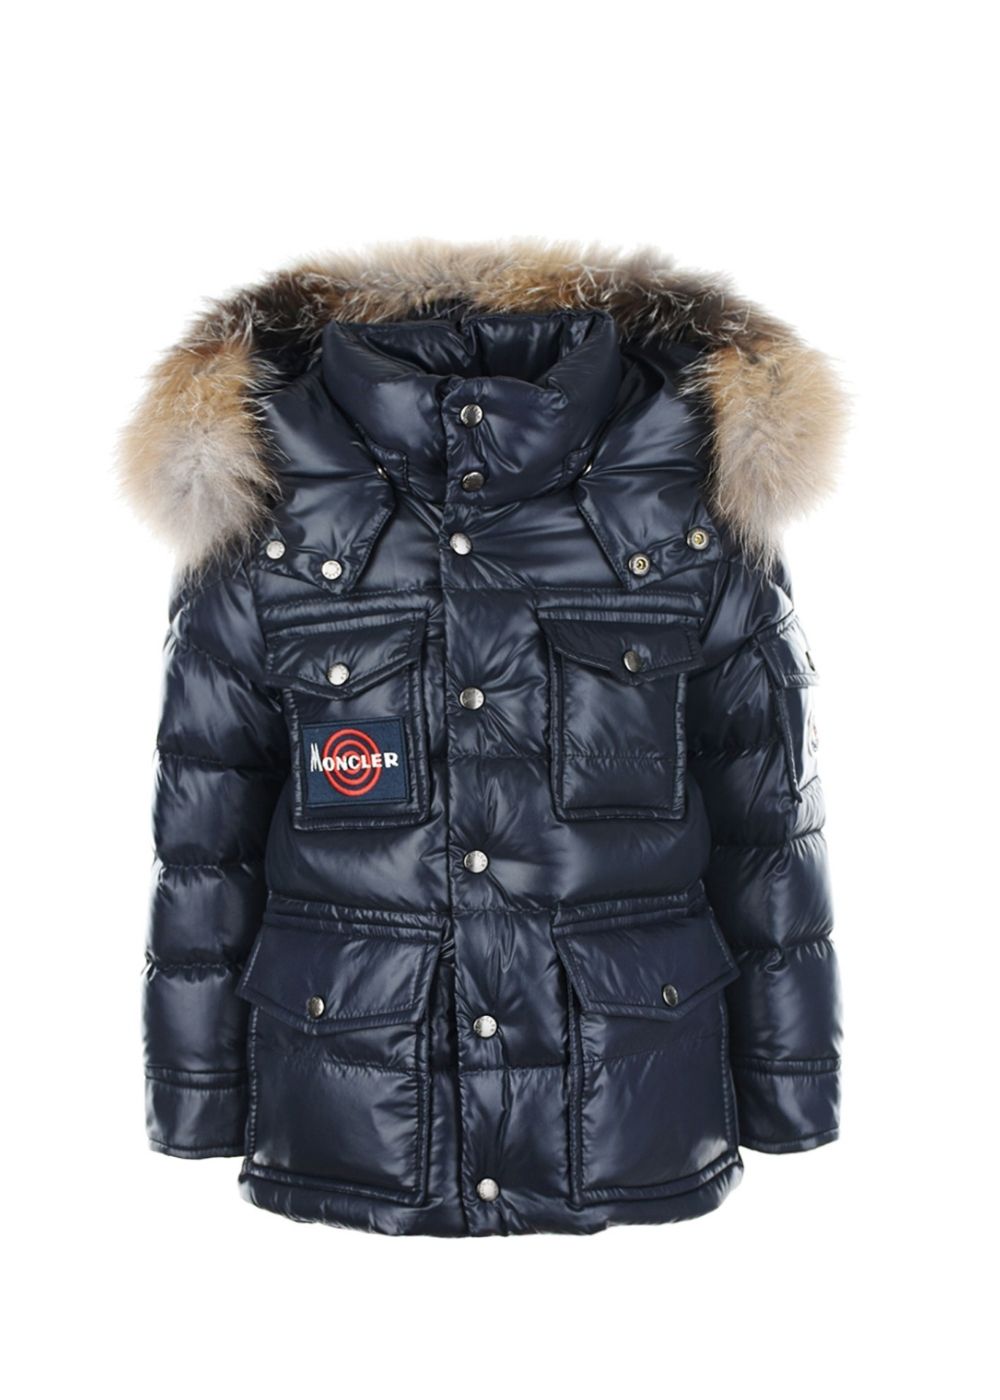 Featured image for “Moncler Severac”